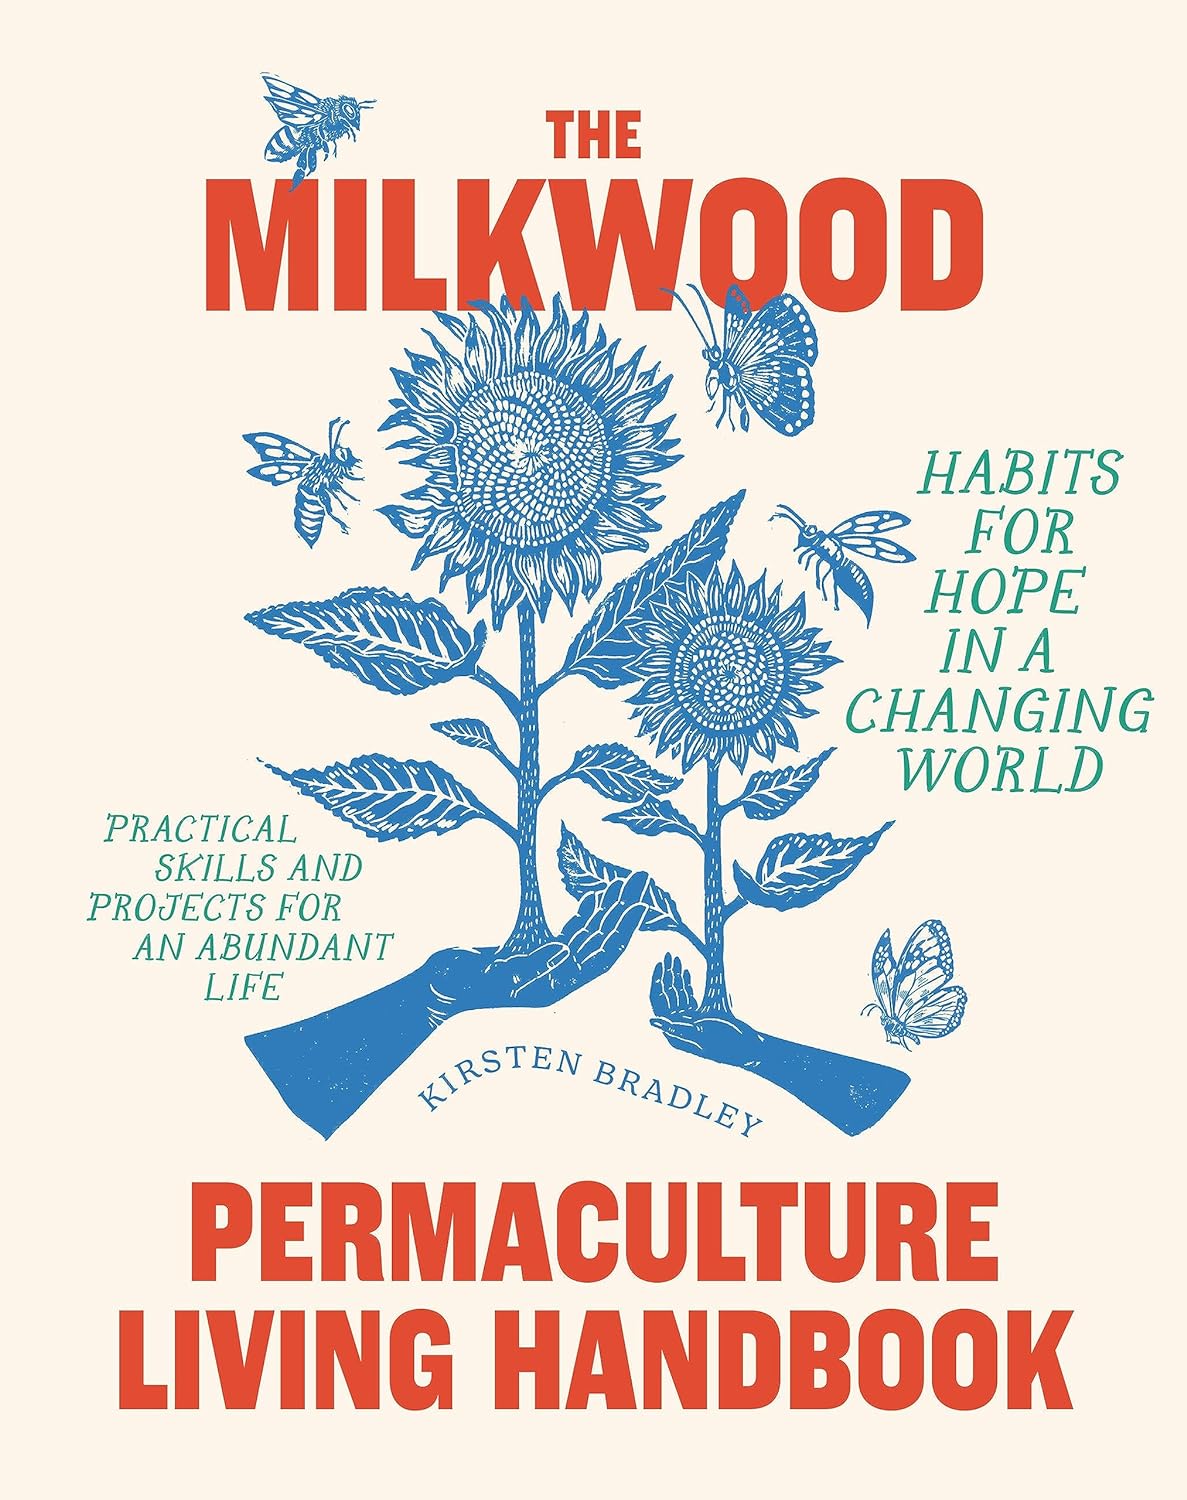 The Milkwood Permaculture Living